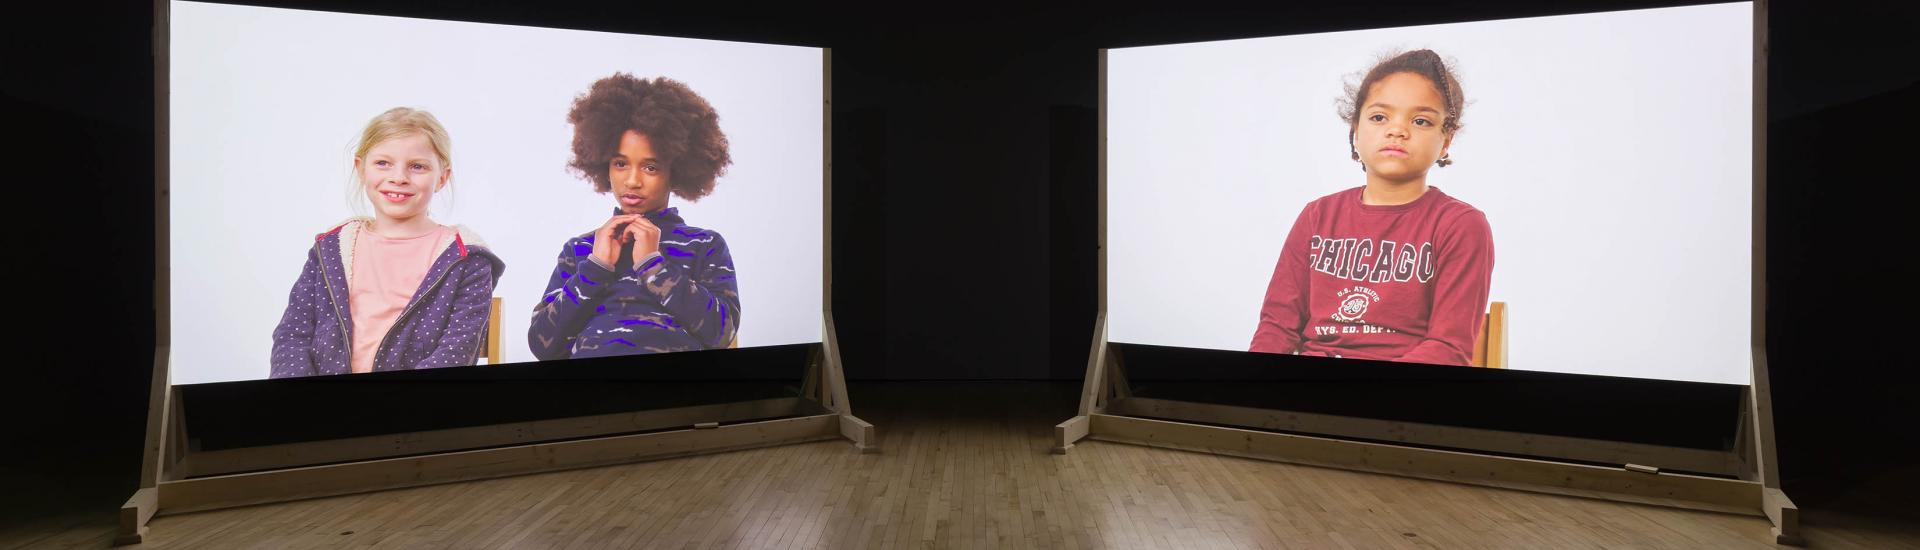 Two screens with films of children talking projected on them 